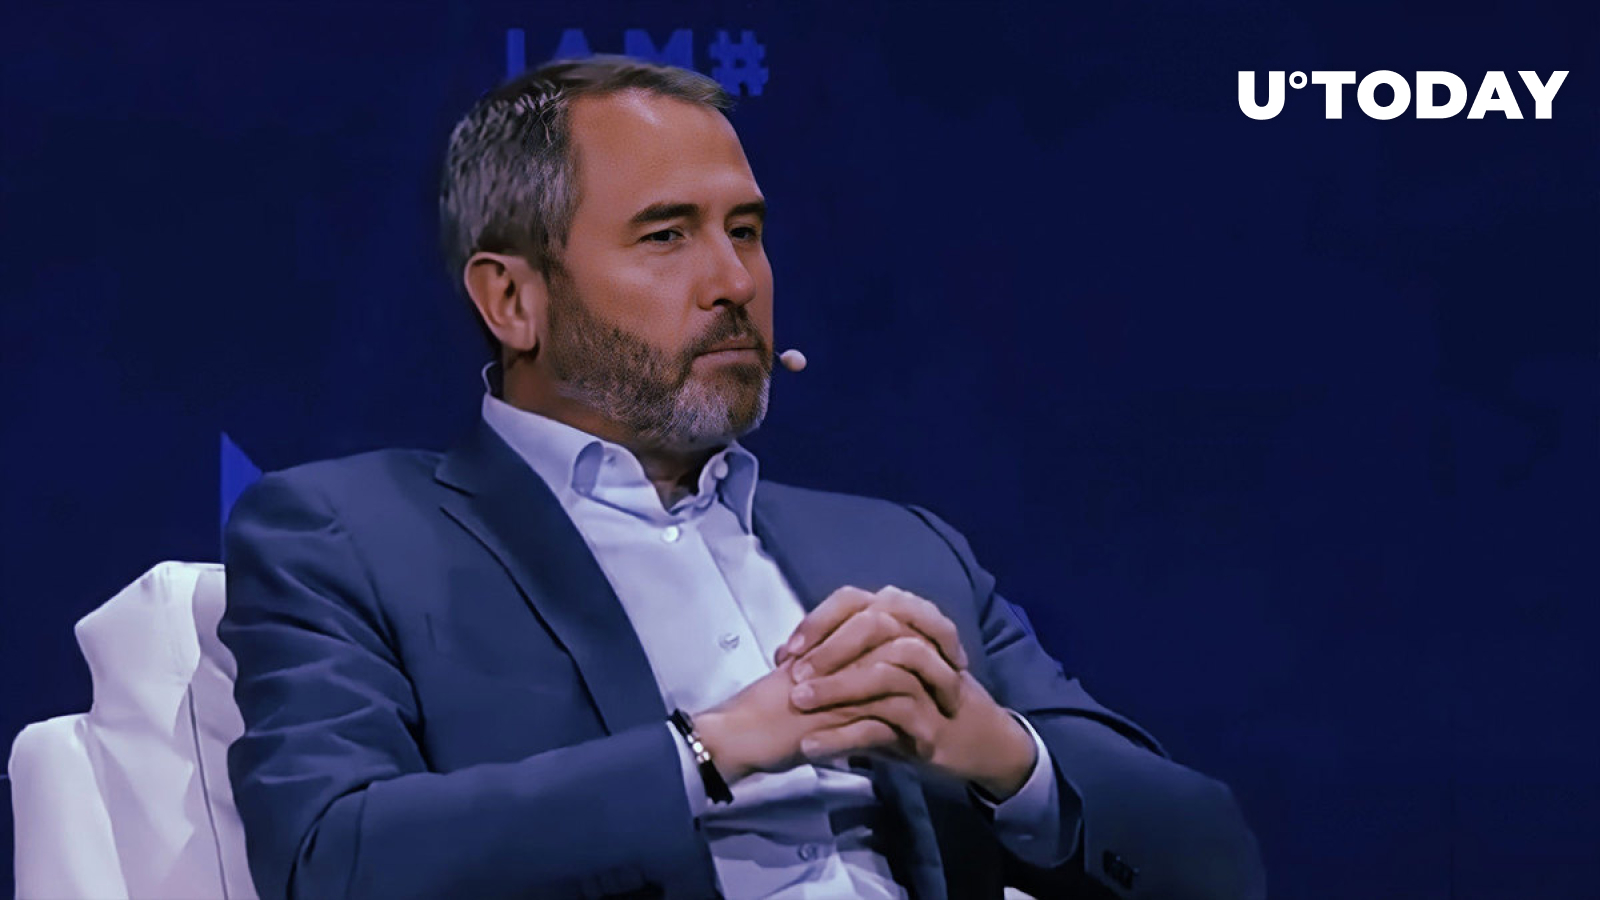 Brad Garlinghouse Congratulates Ripple Team for Reaching Current Point When Verdict May Be on Horizon